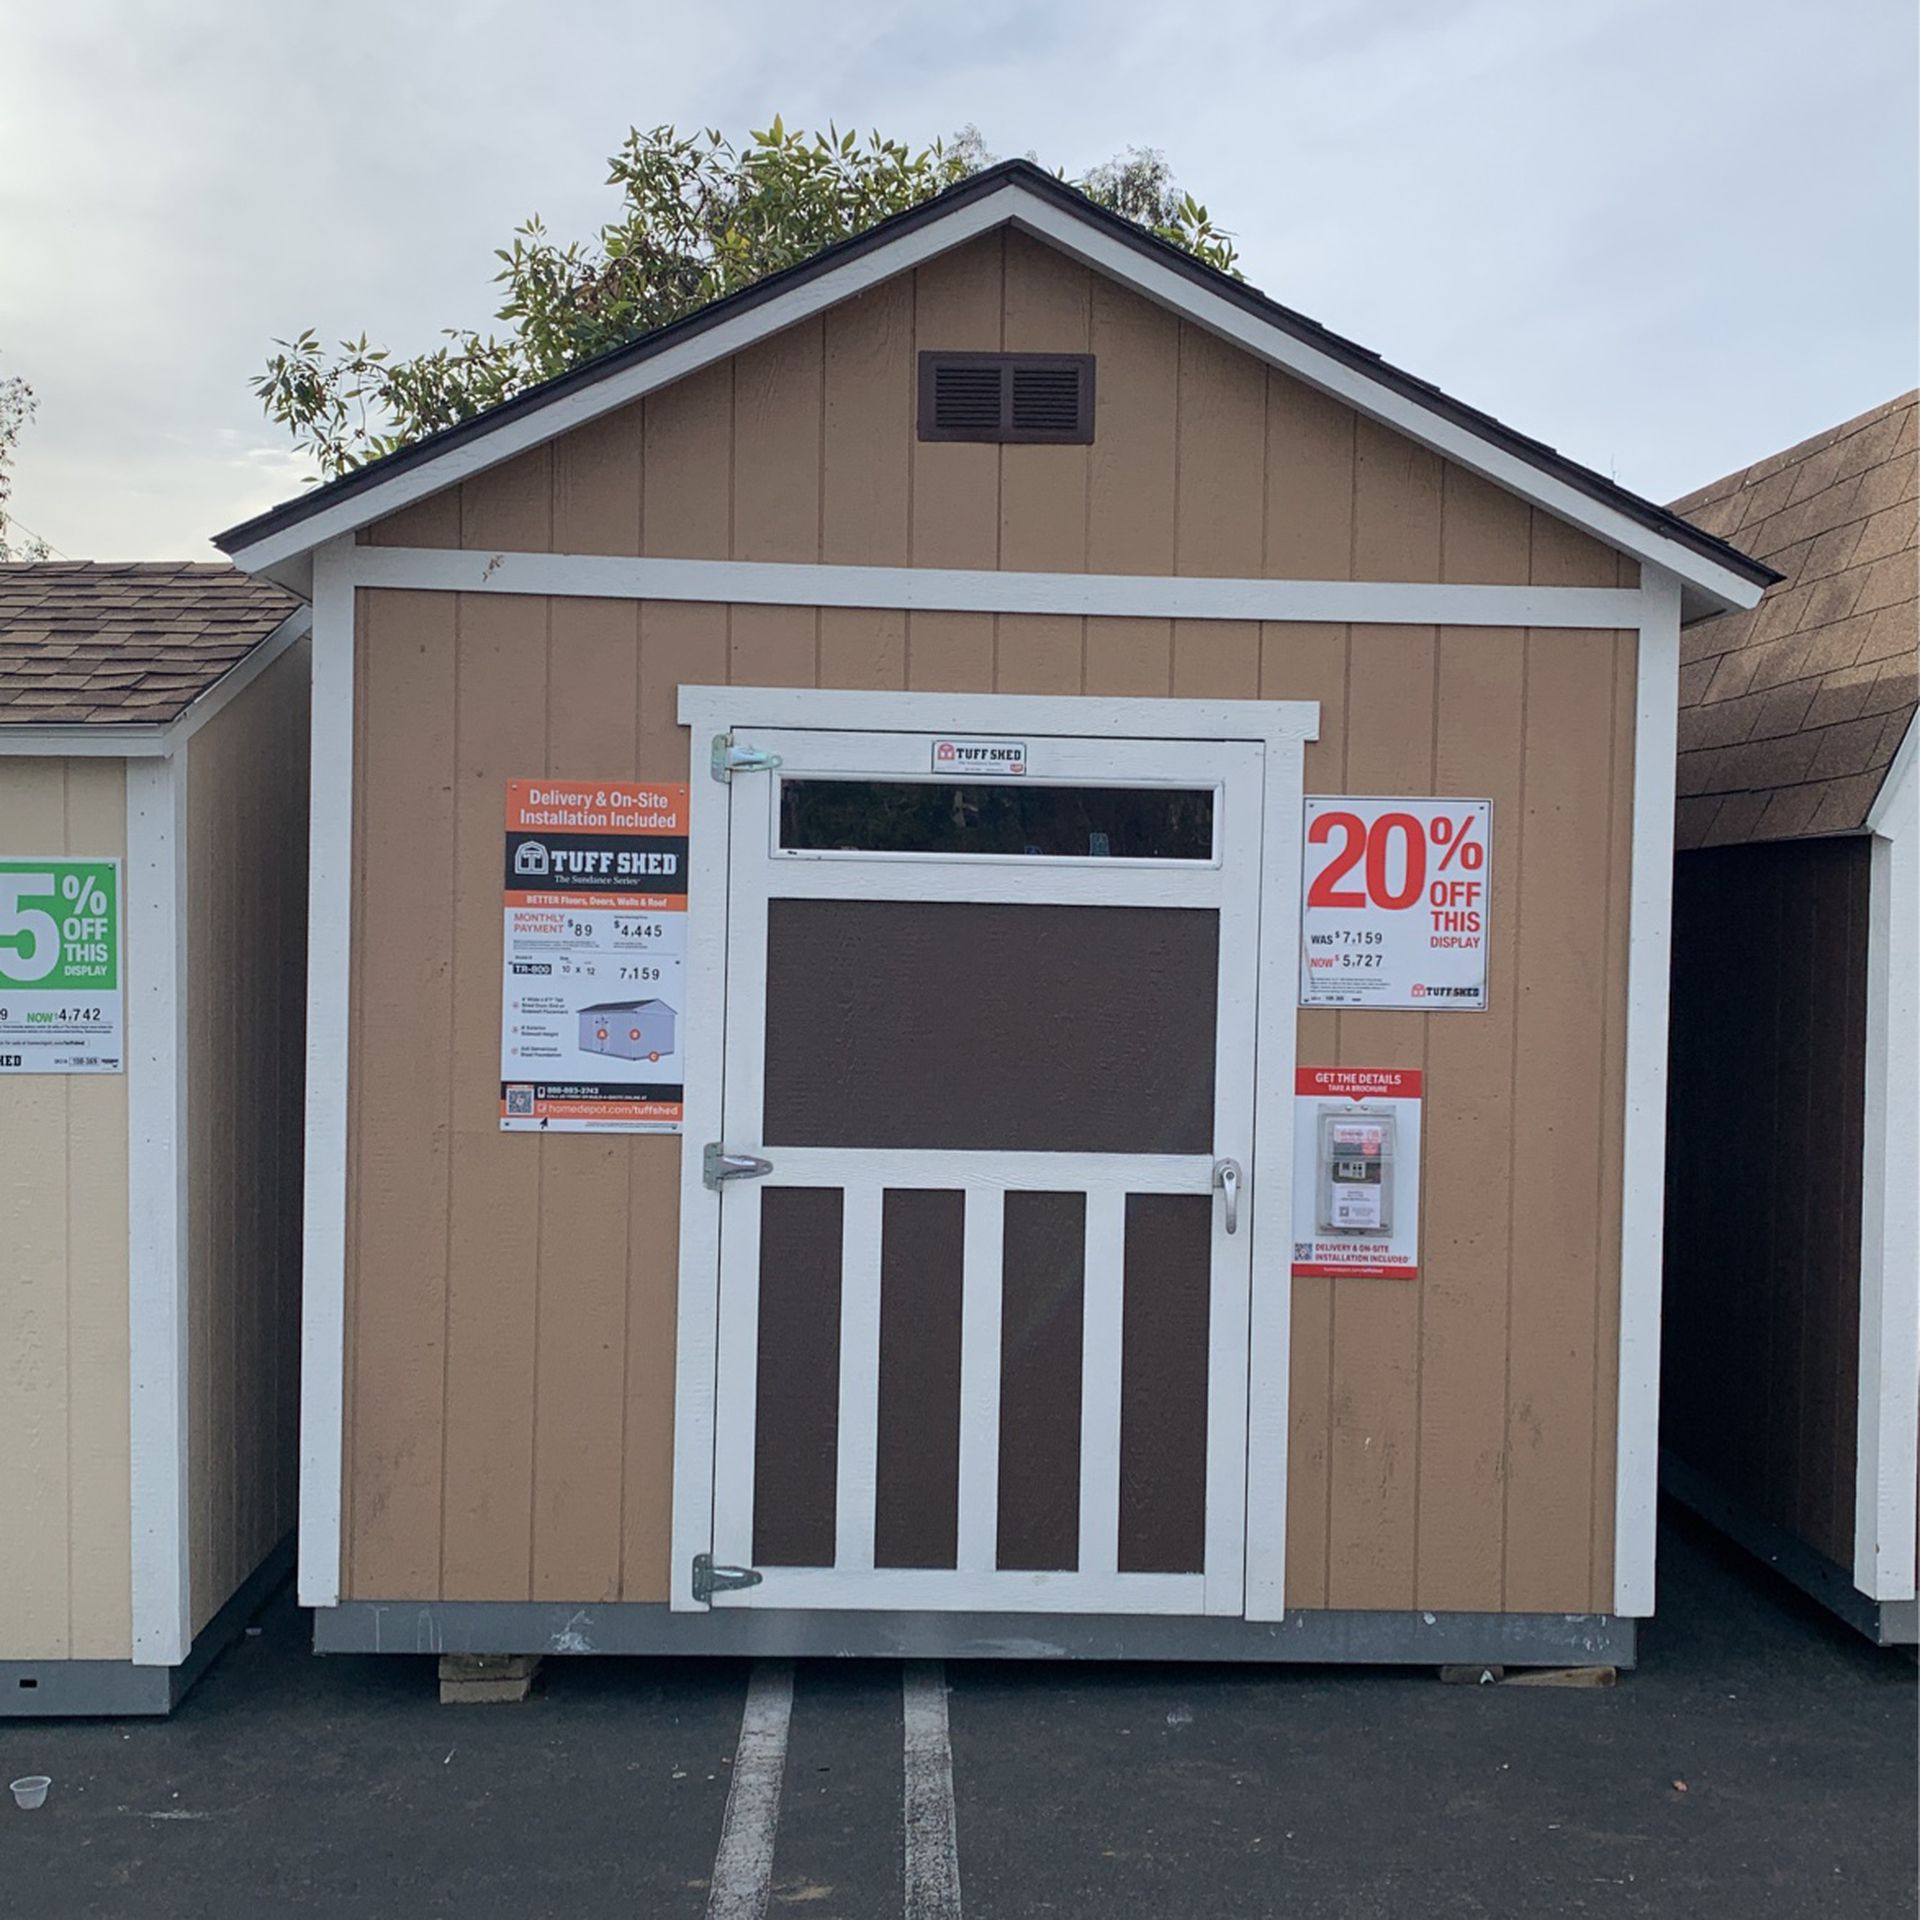 Tuff Shed Sundance TR-800 10x12 Was $7,159 Now $5,727 20% Off Financing Available!